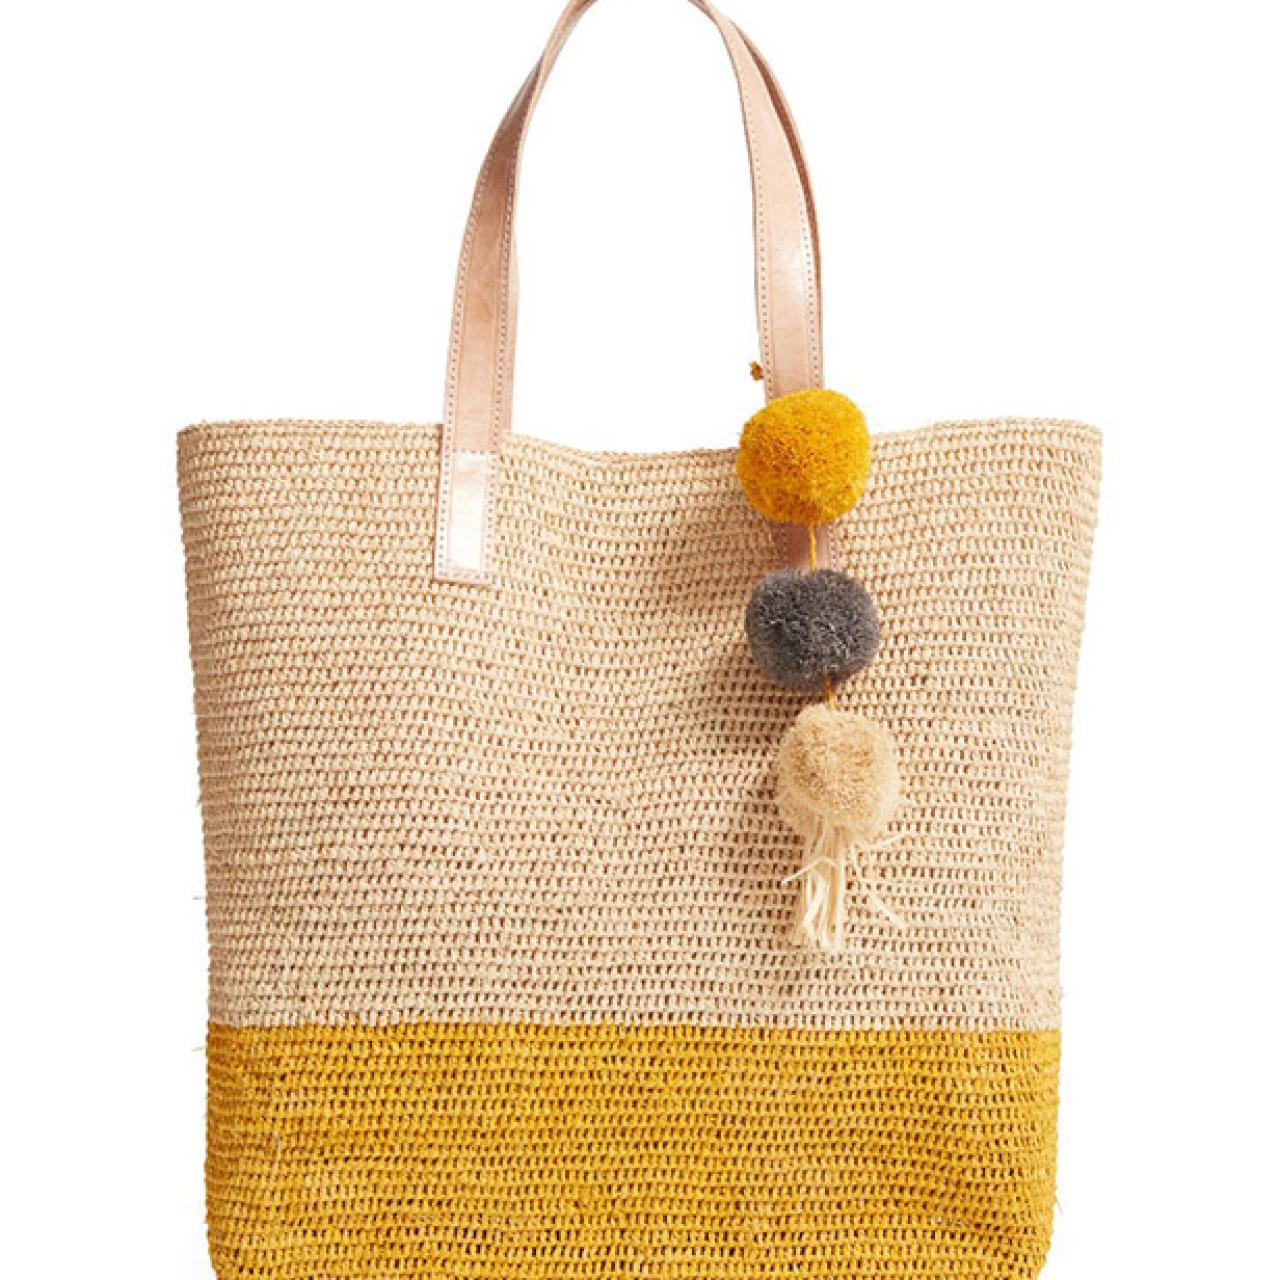 Summer Beach Bags to Buy Right Now | HGTV's Decorating & Design ...